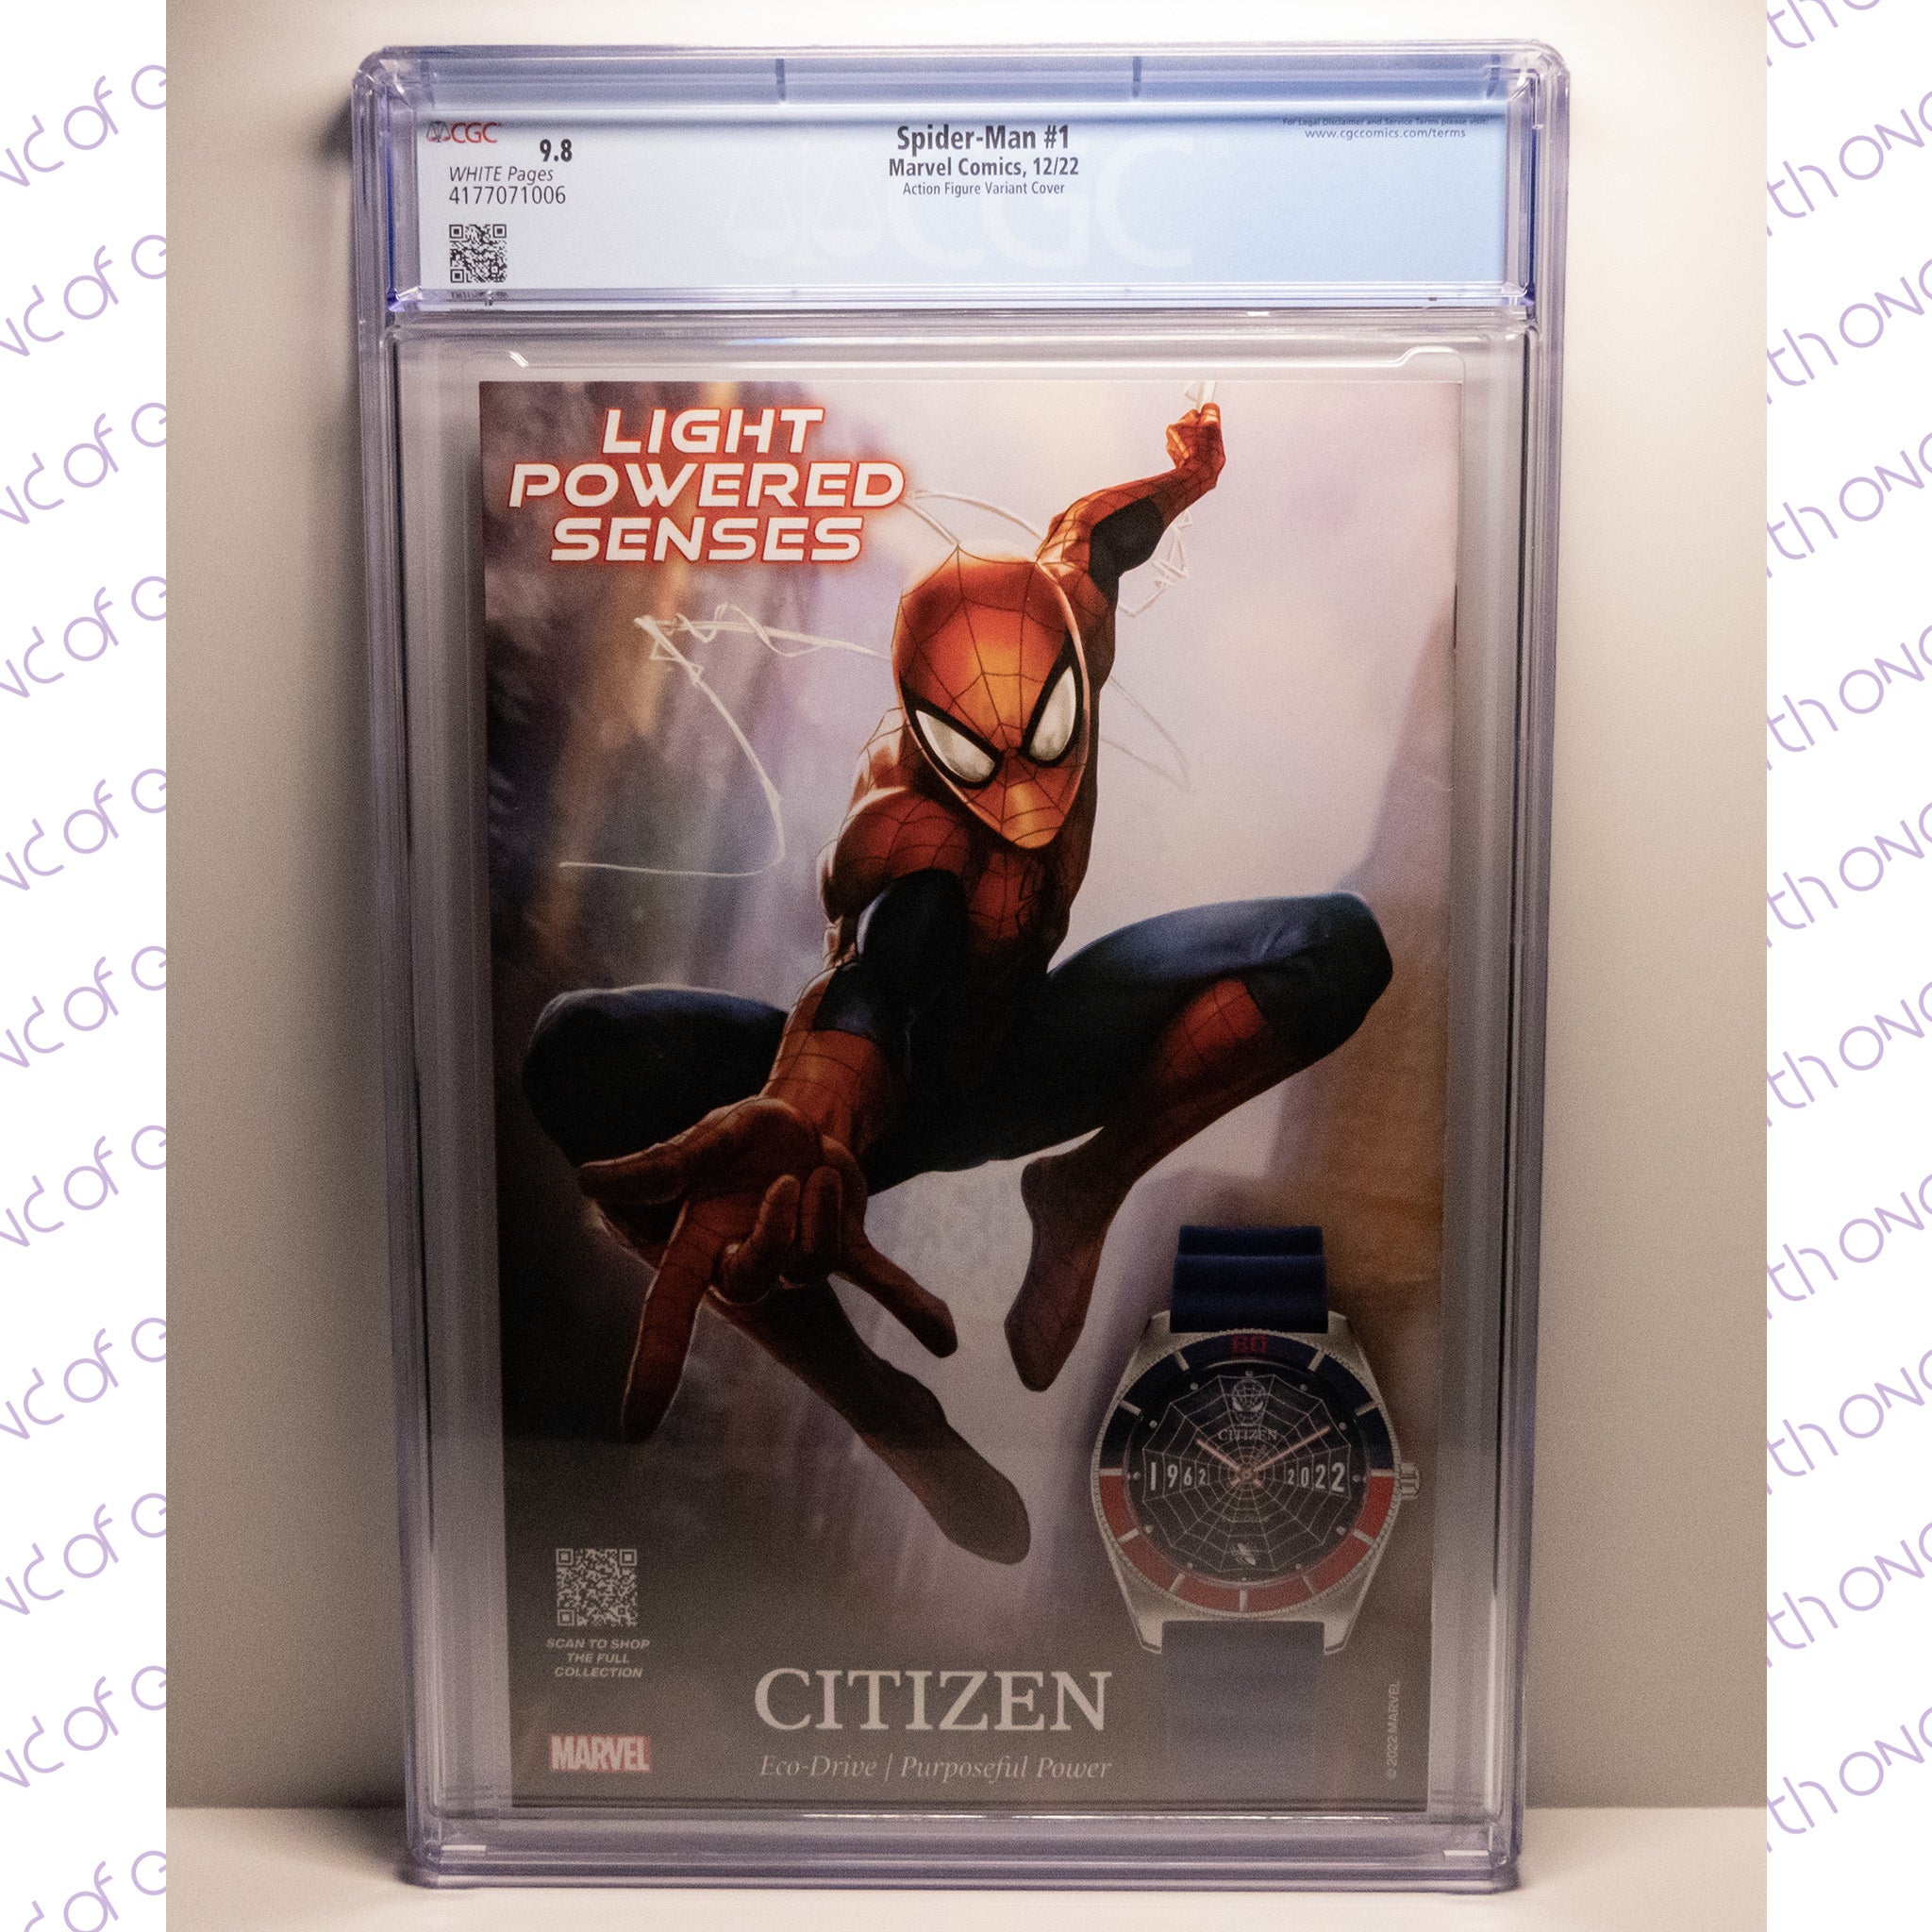 Spider-Man #1 | 2022 | CGC 9.8 | Variant Cover | Oscorp Suit Action Figure